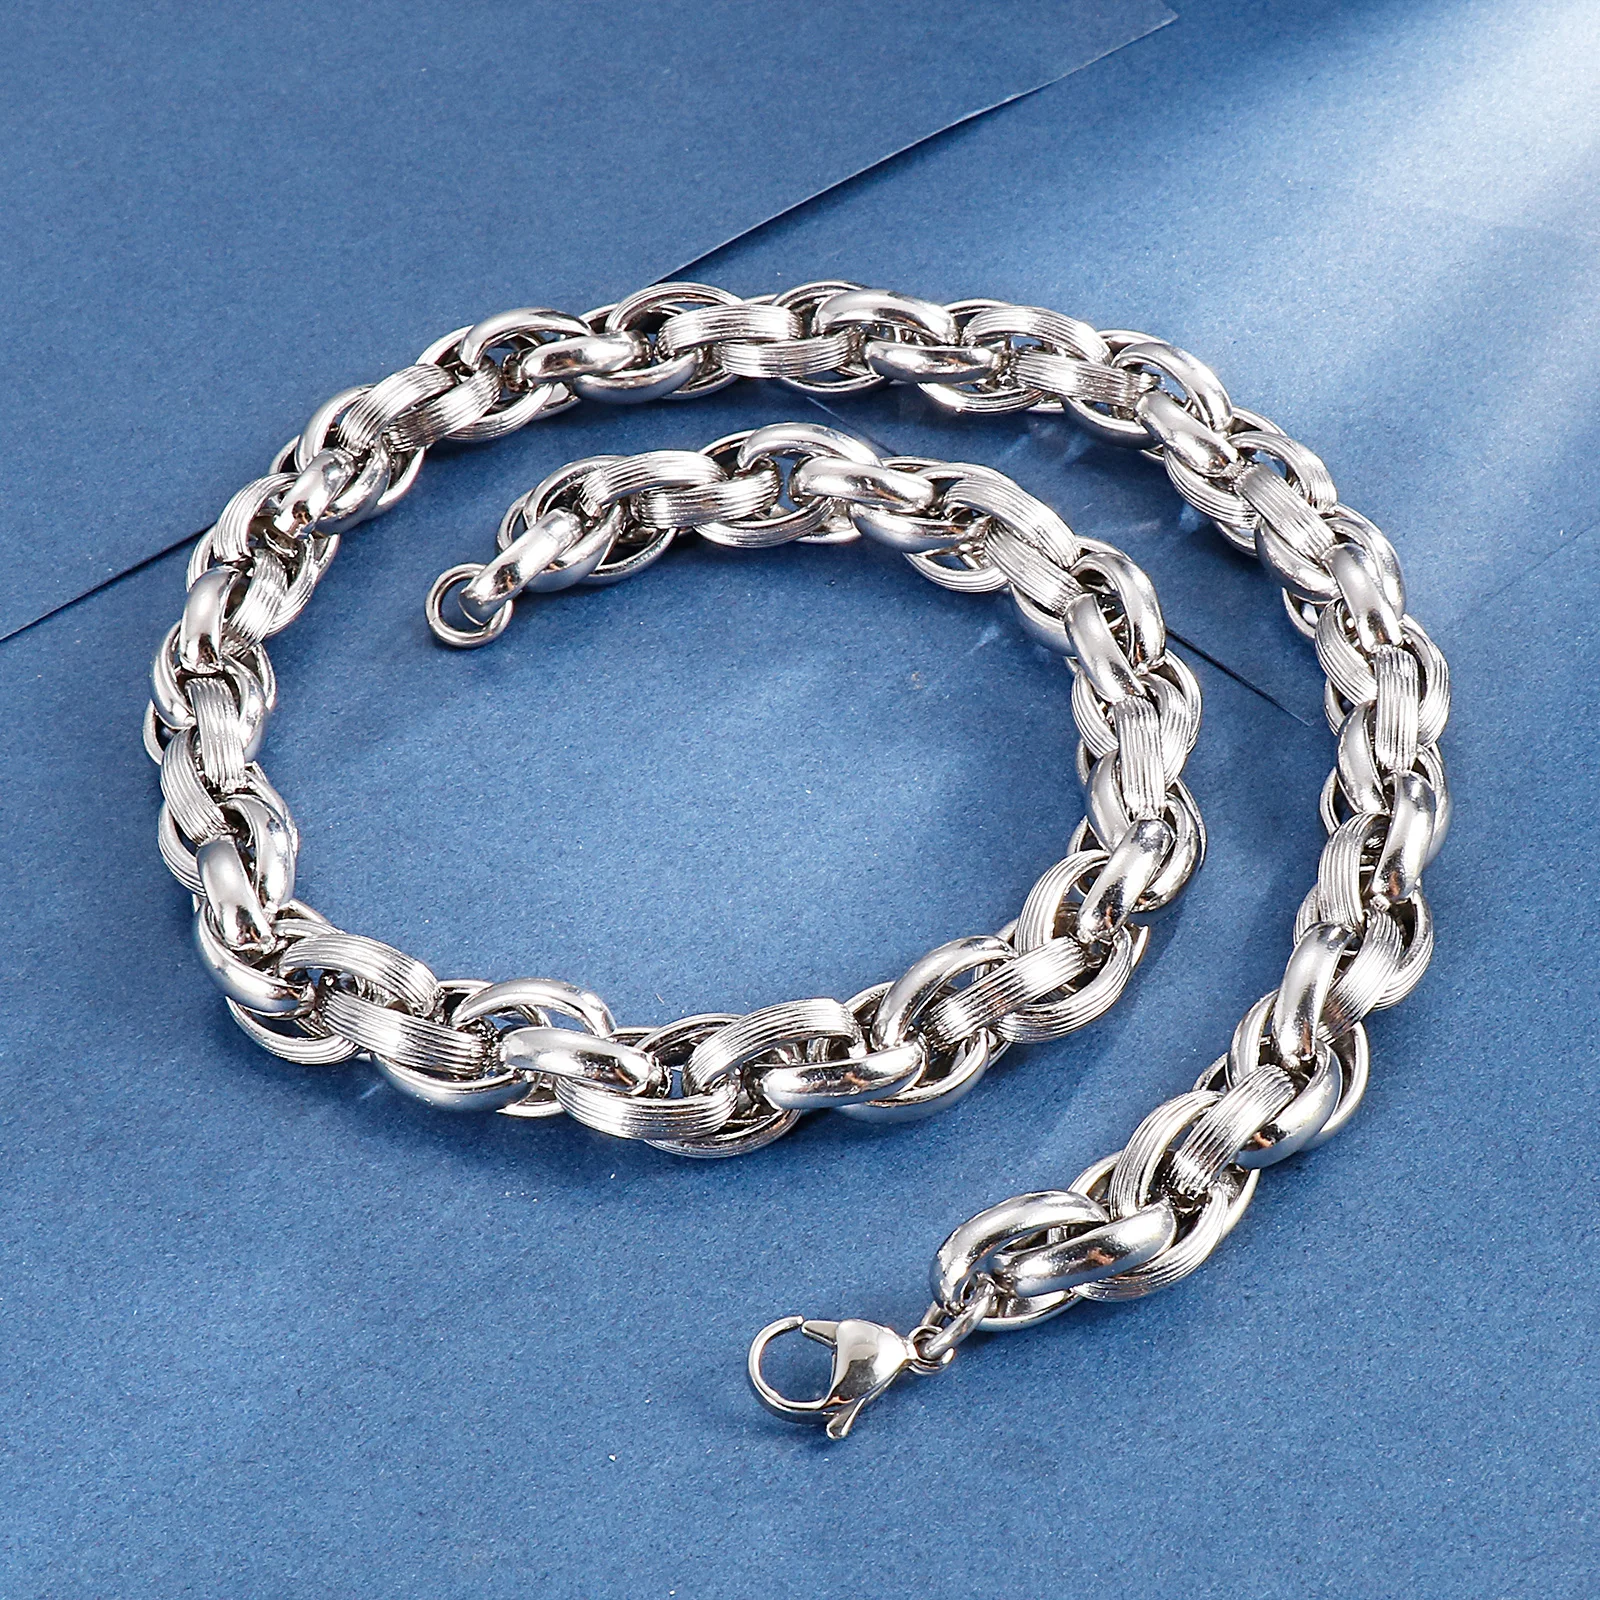 

11mm Stainless Steel Men Necklace Oval Rope Twisted Link Chain Never Fade Men Gift Heavy Link Chain Hip Hop Fashion Jewelry